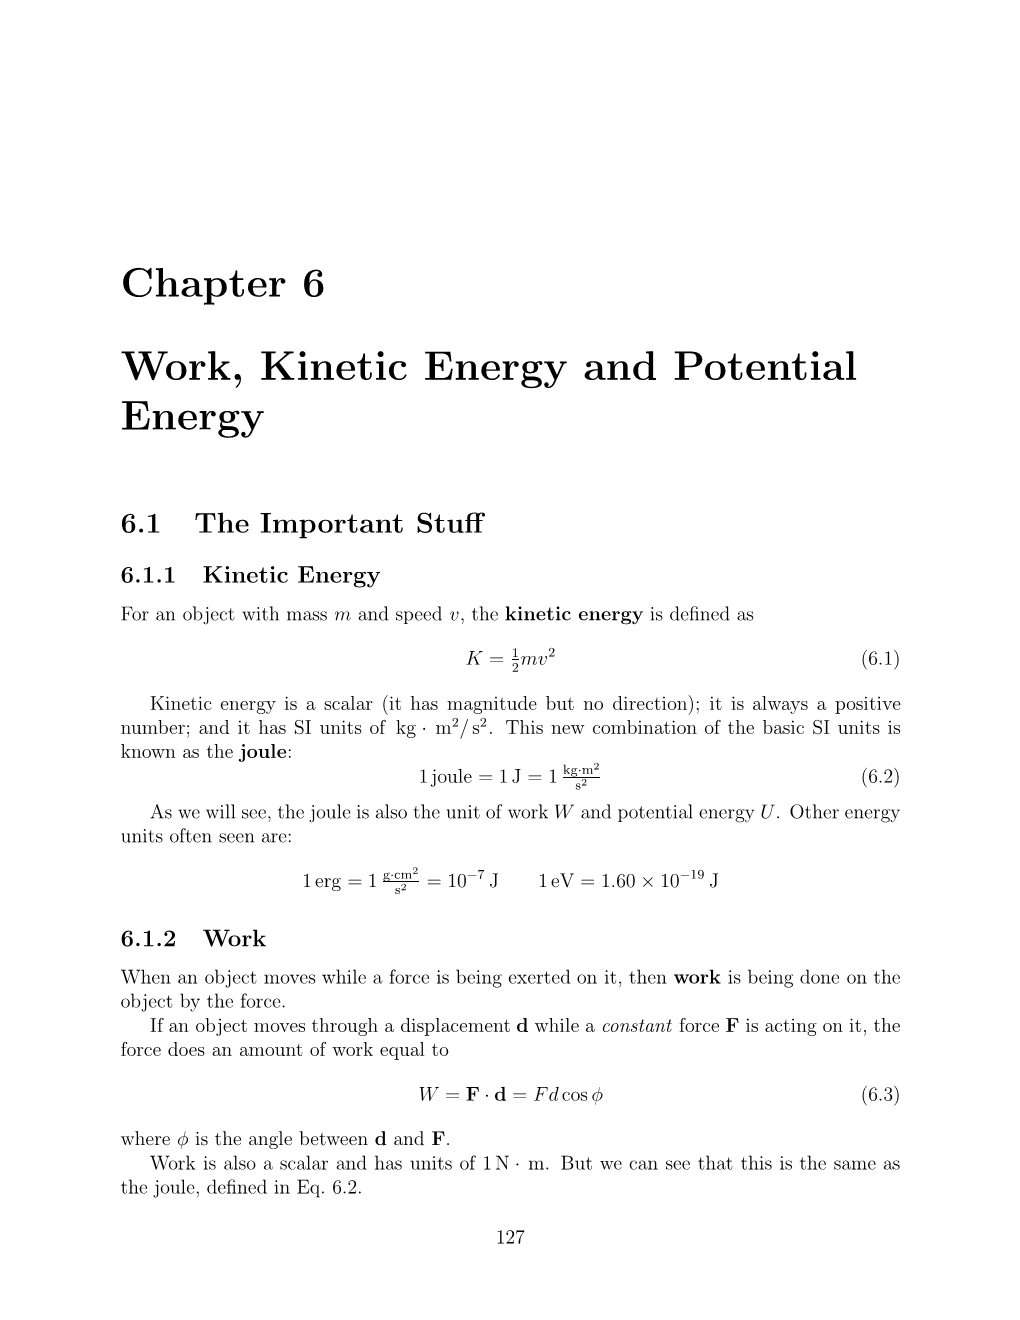 Chapter 6 Work, Kinetic Energy and Potential Energy